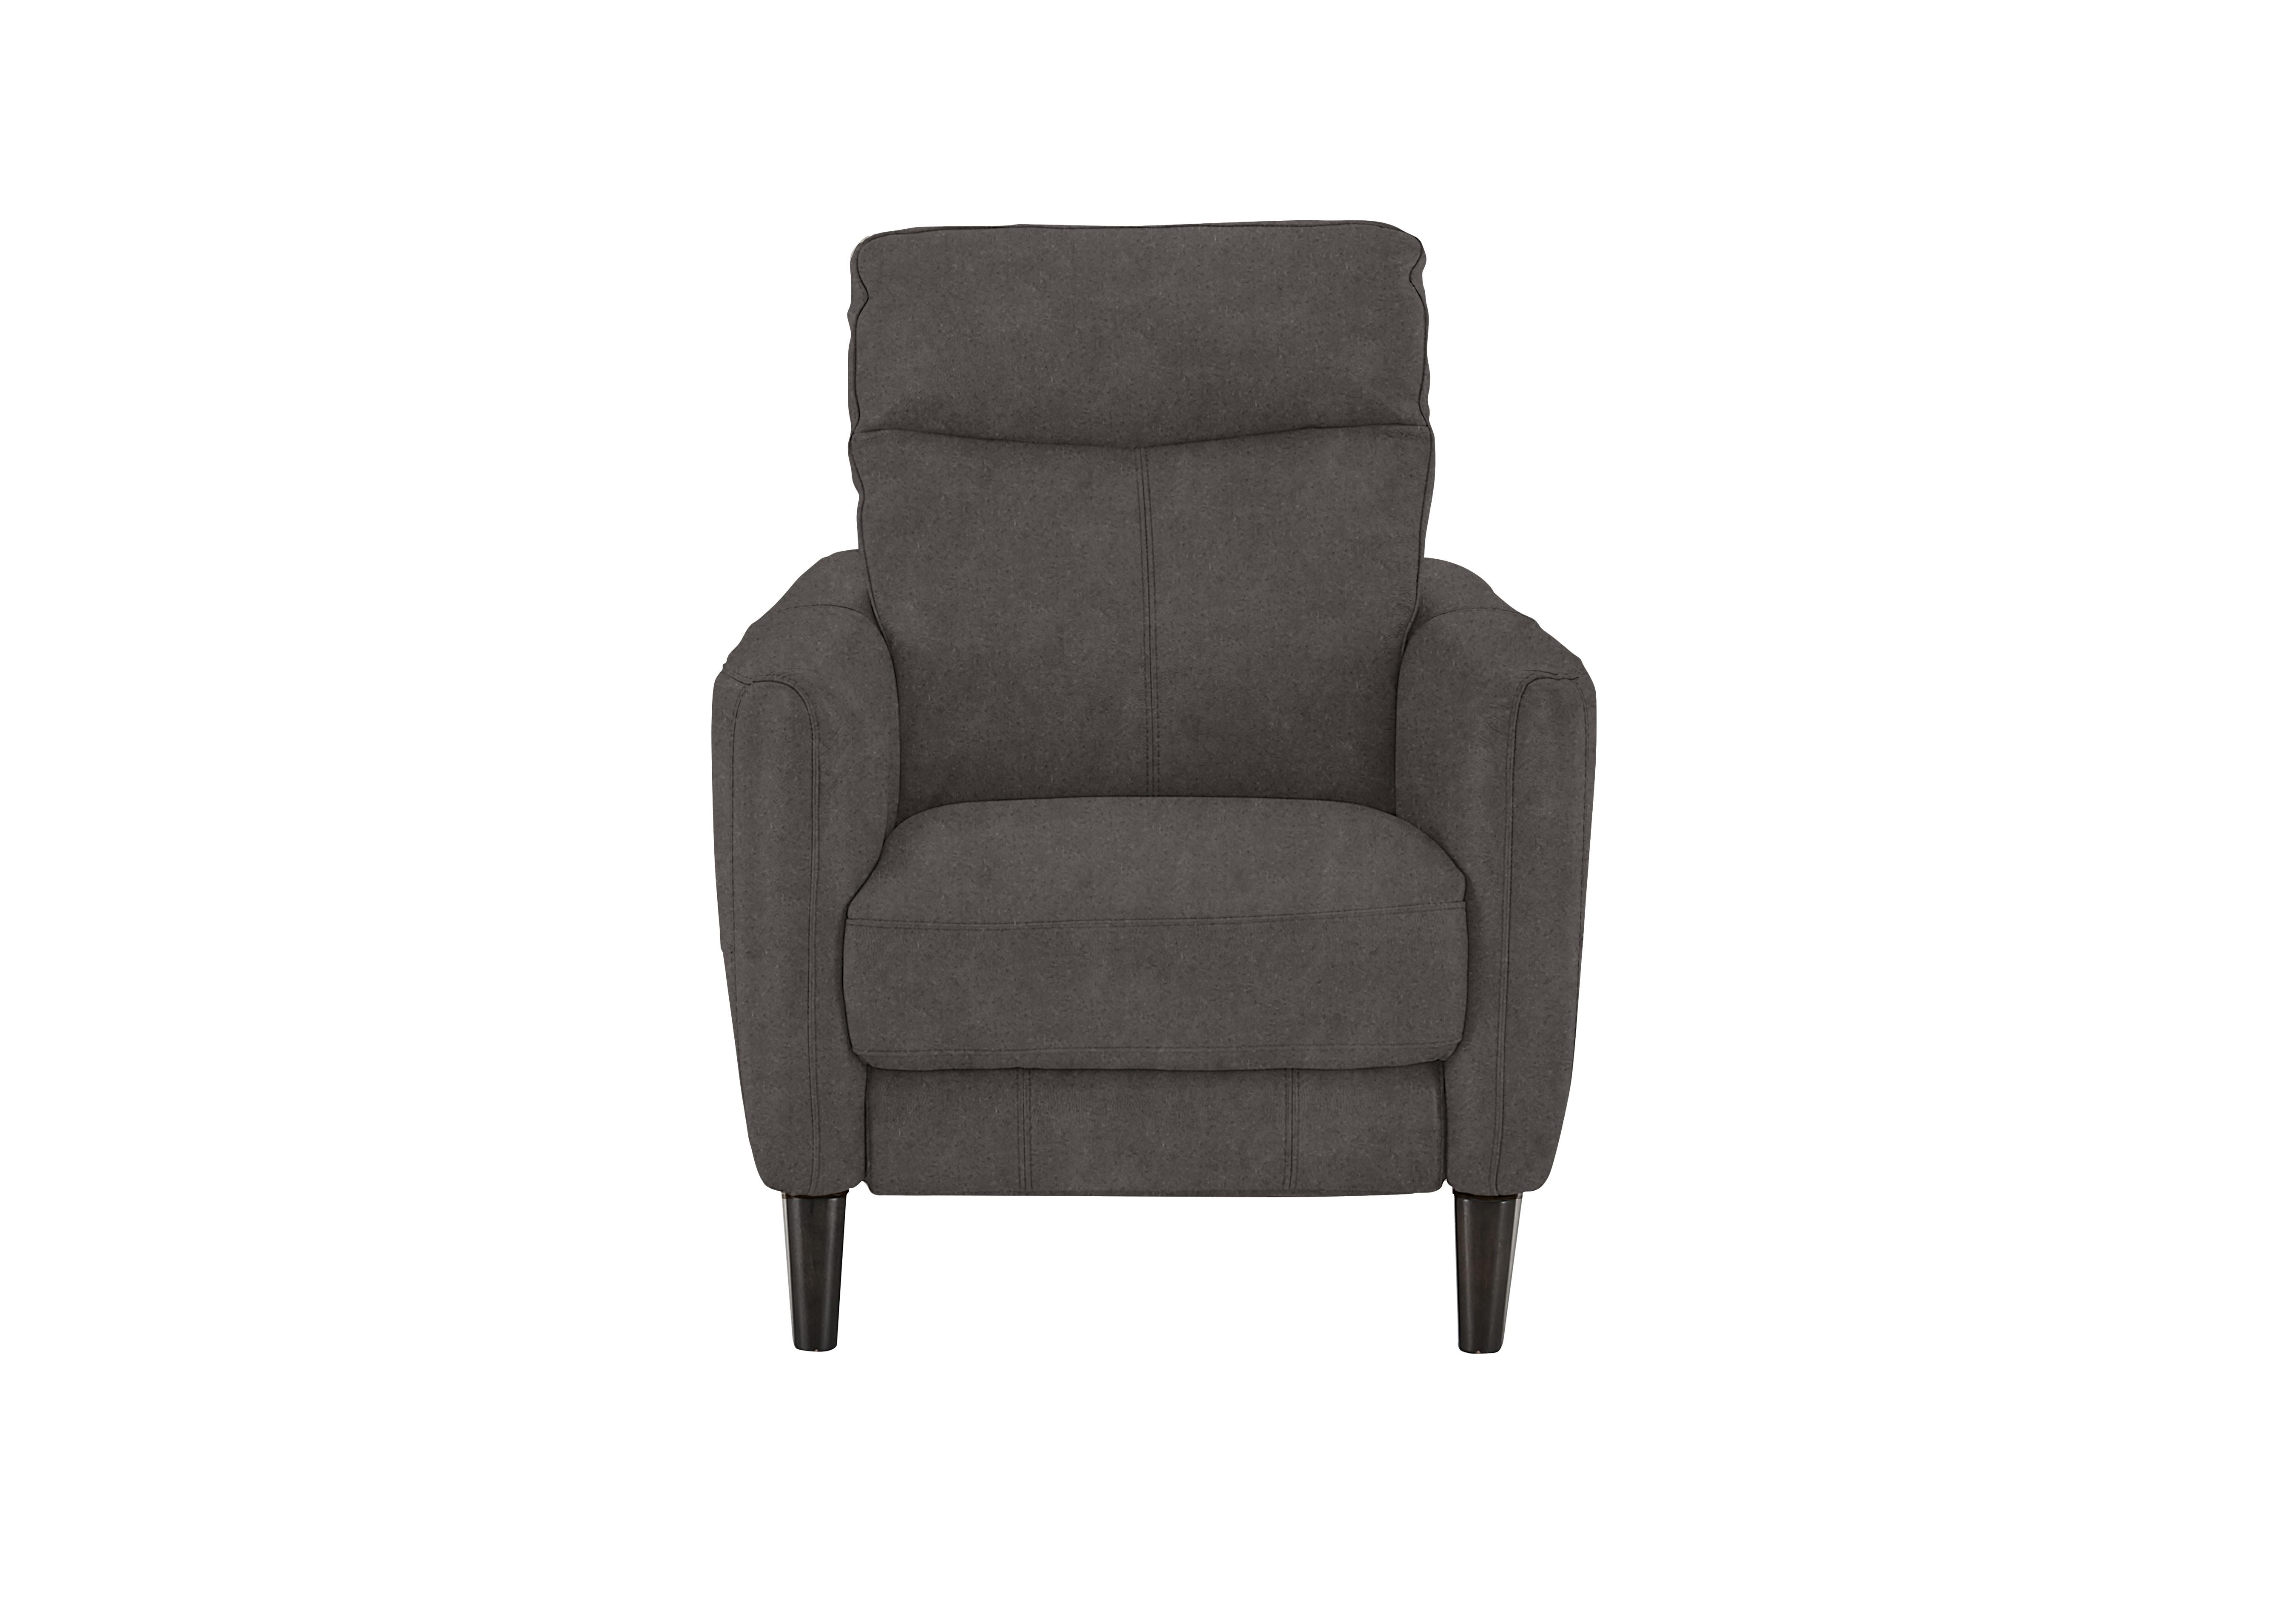 Compact Collection Petit Fabric Armchair in Bfa-Blj-R16 Grey on Furniture Village